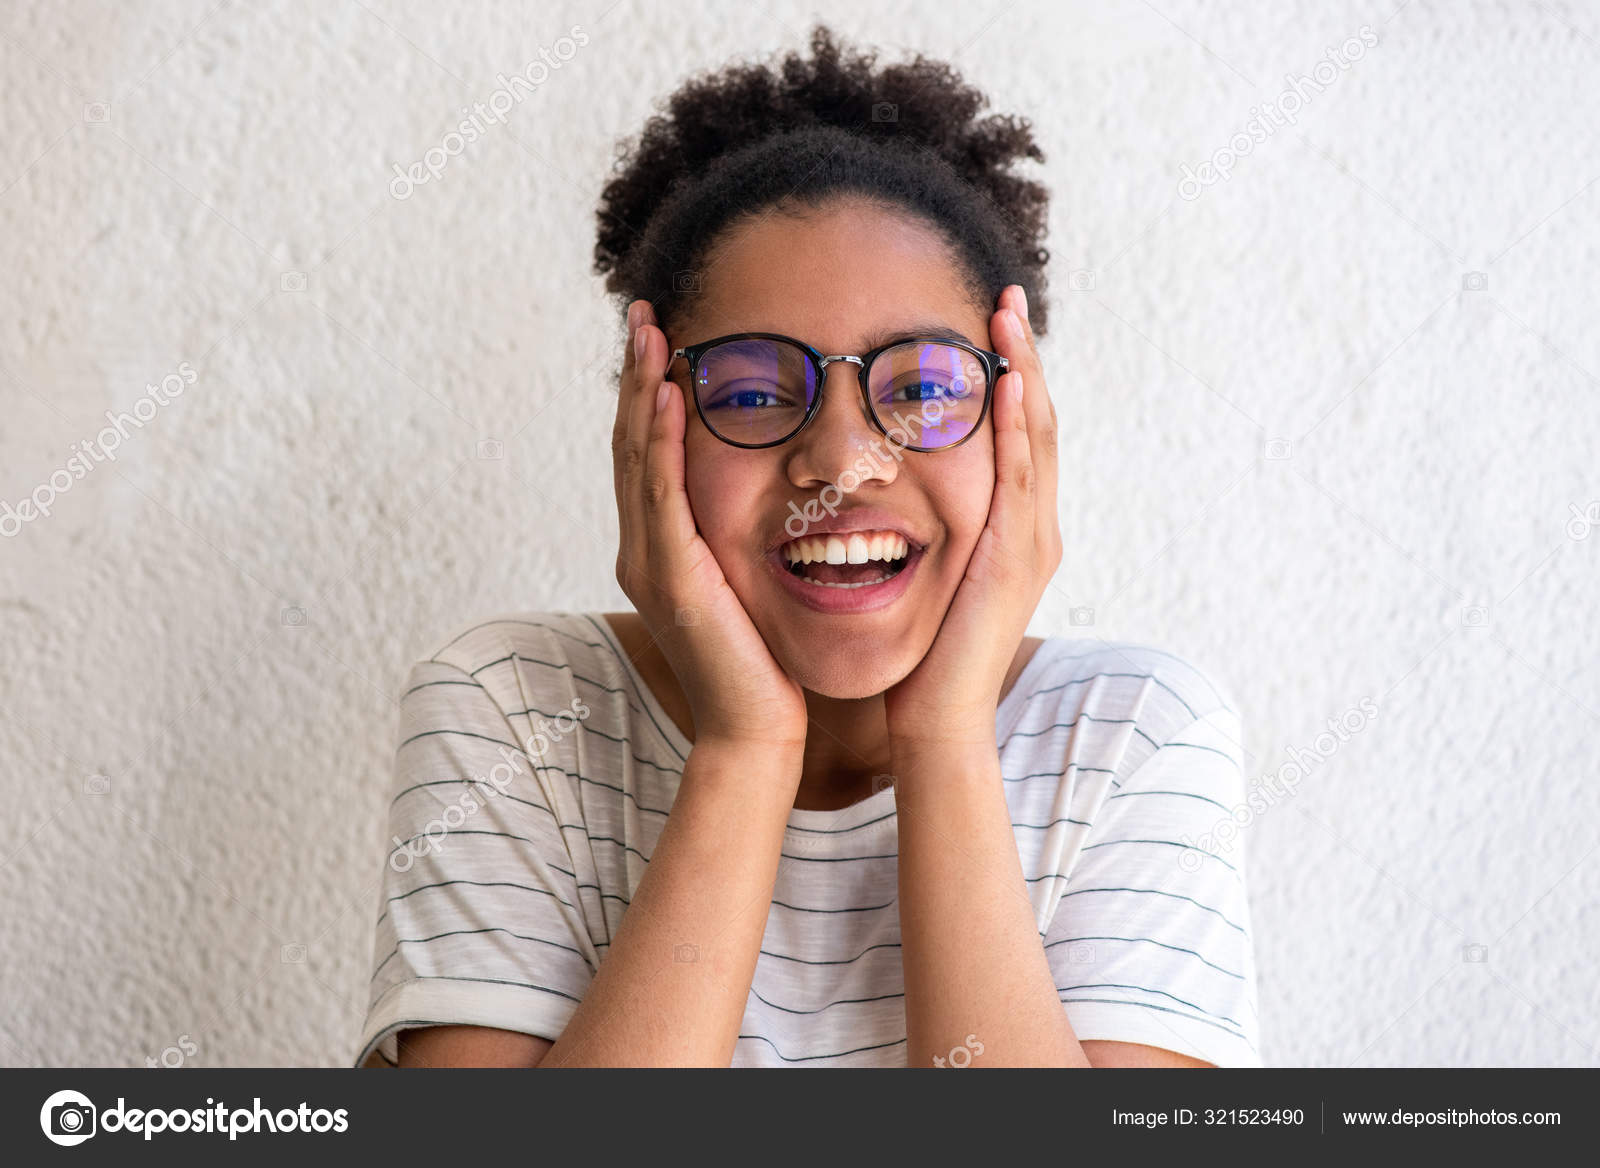 Smiling Young African American Woman Looking